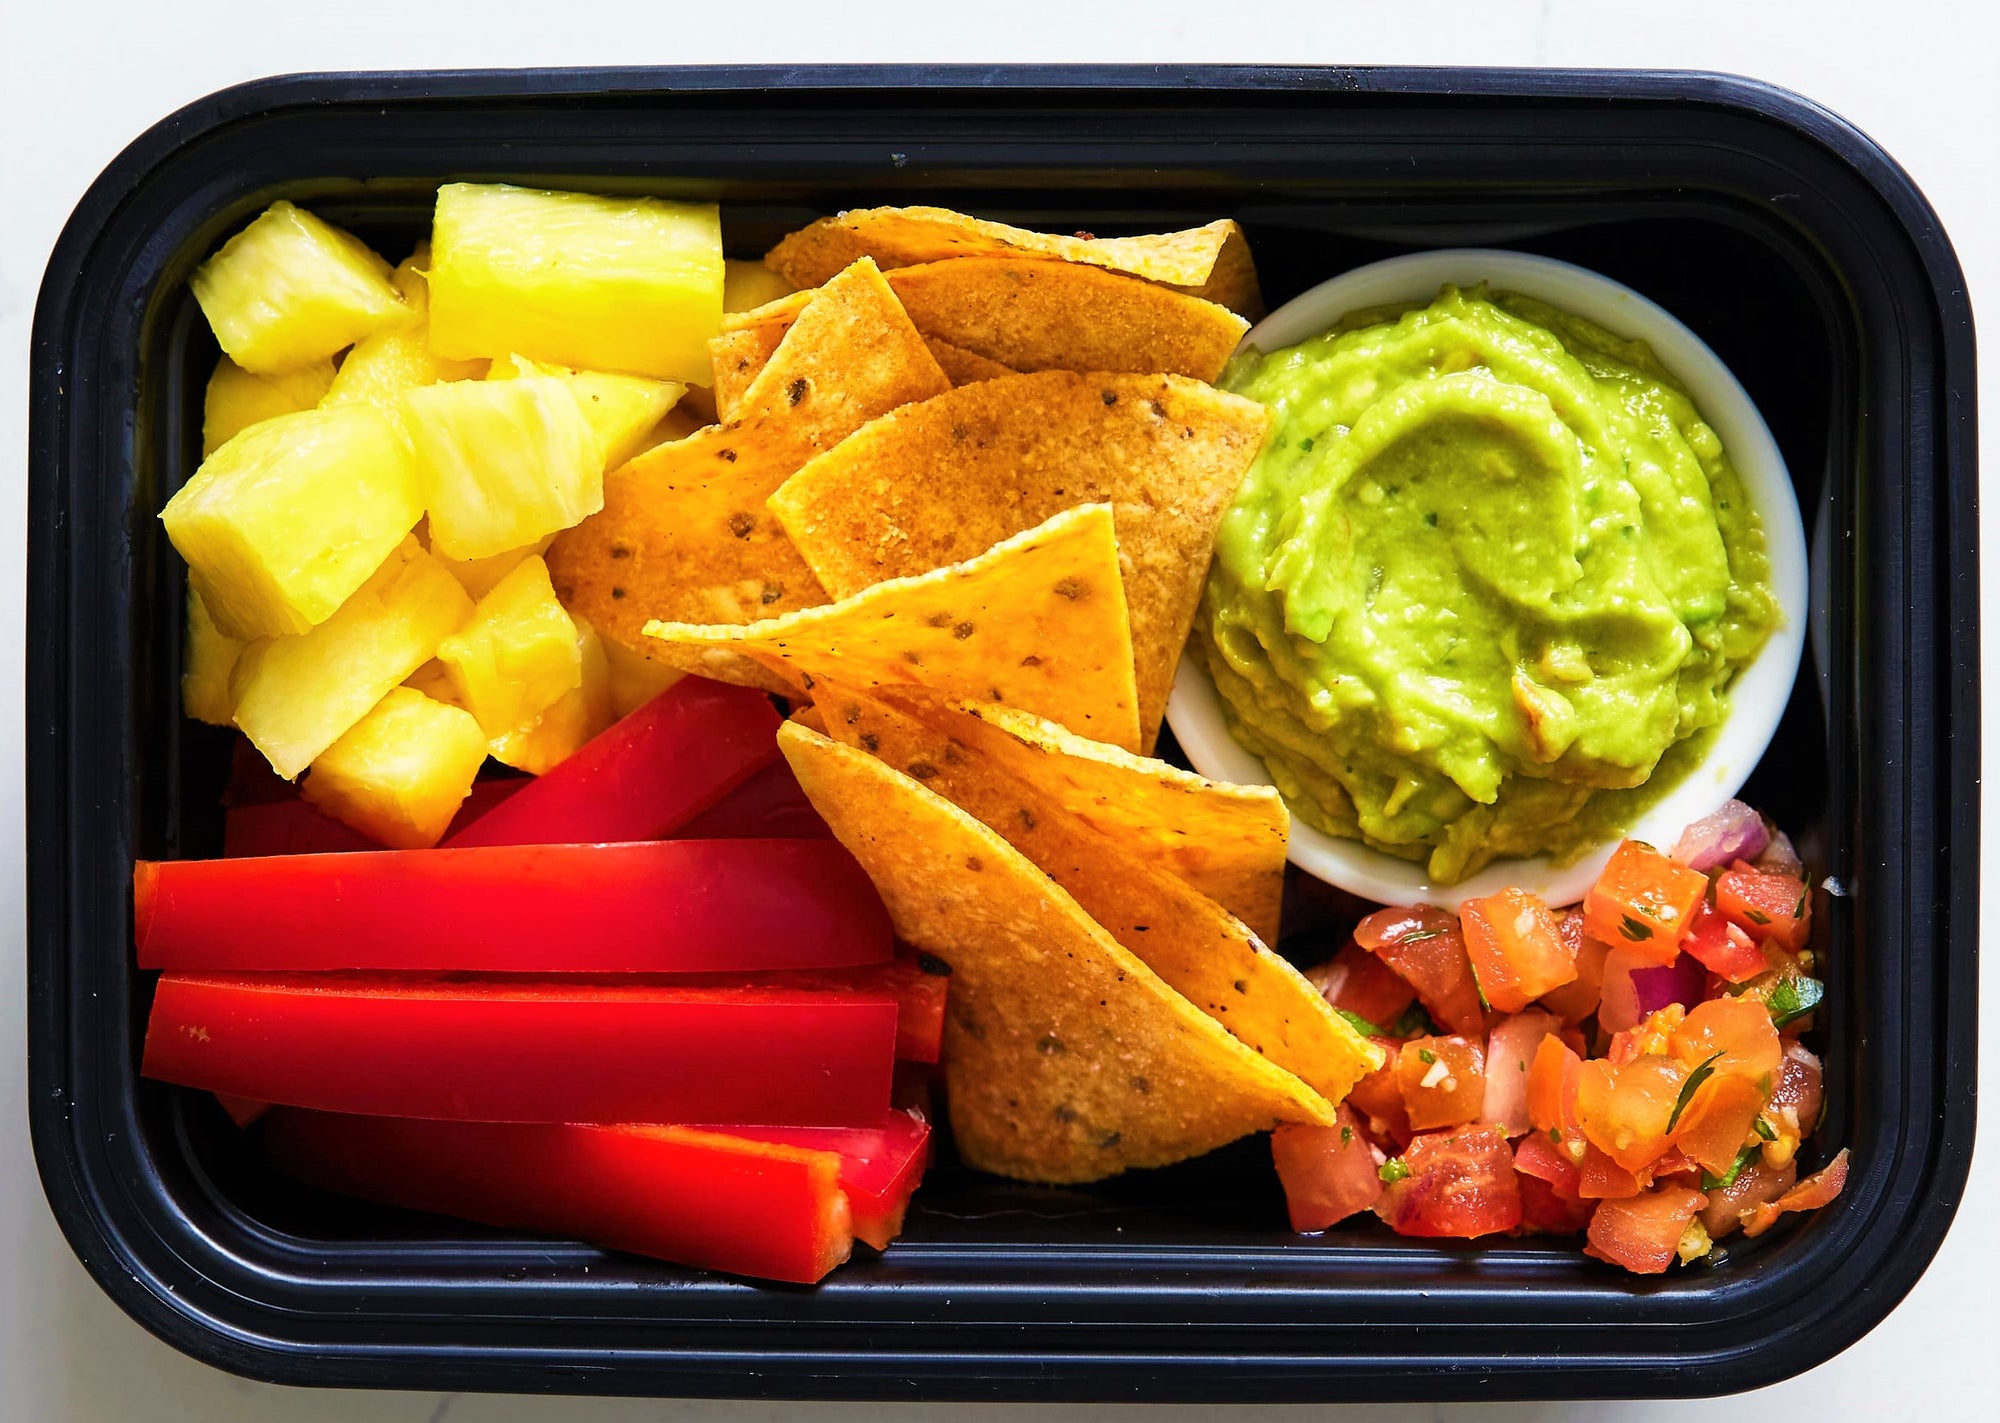 House-made Chips and Dips Snack Box - GreenMeal Inc.